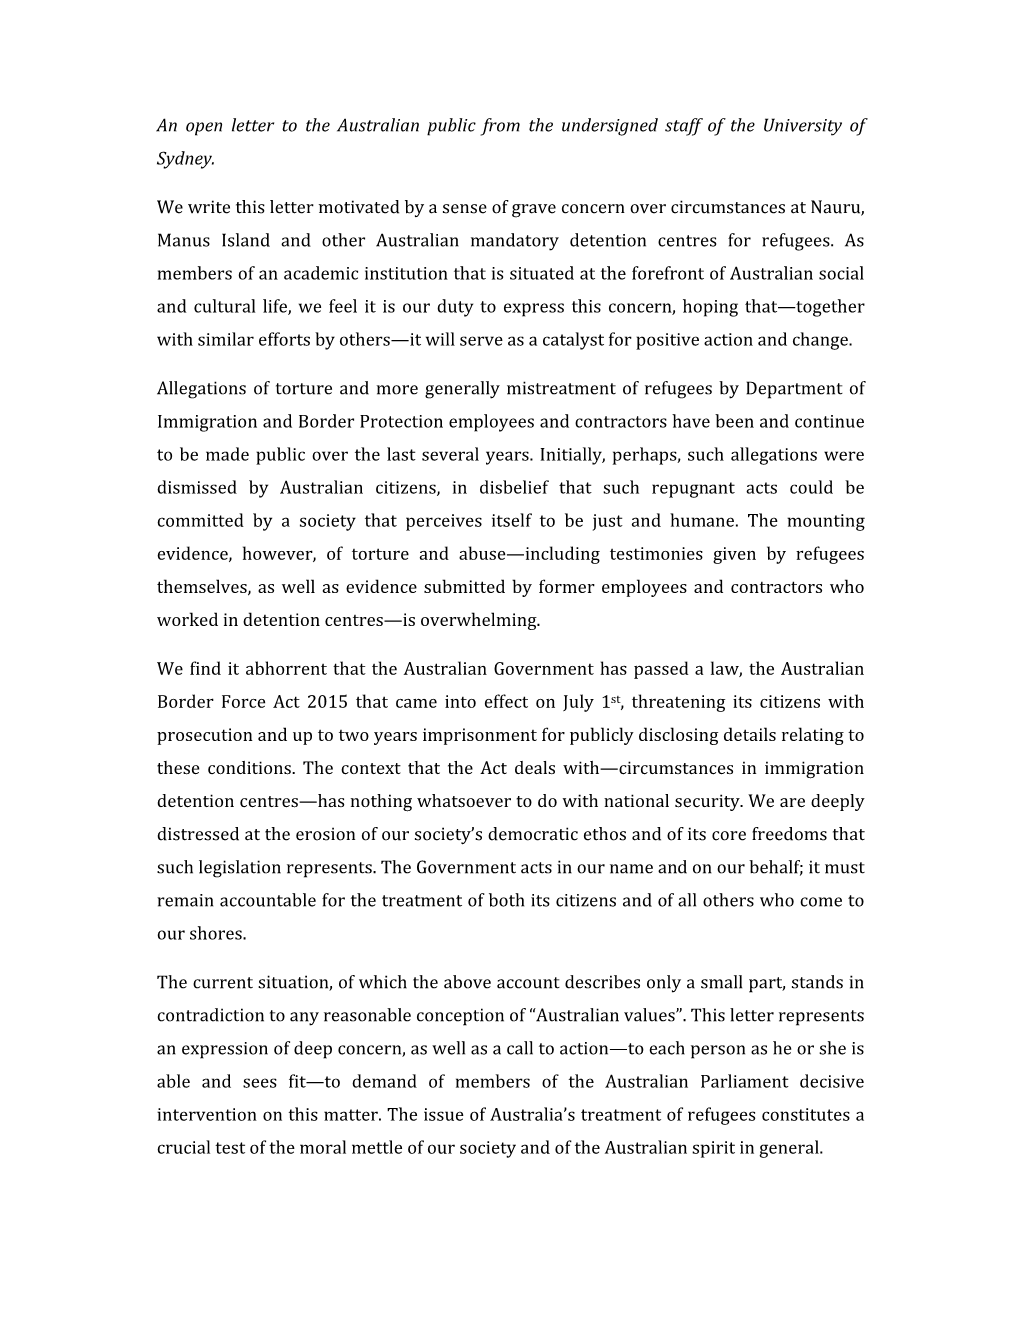 An Open Letter to the Australian Public from the Undersigned Staff of the University of Sydney